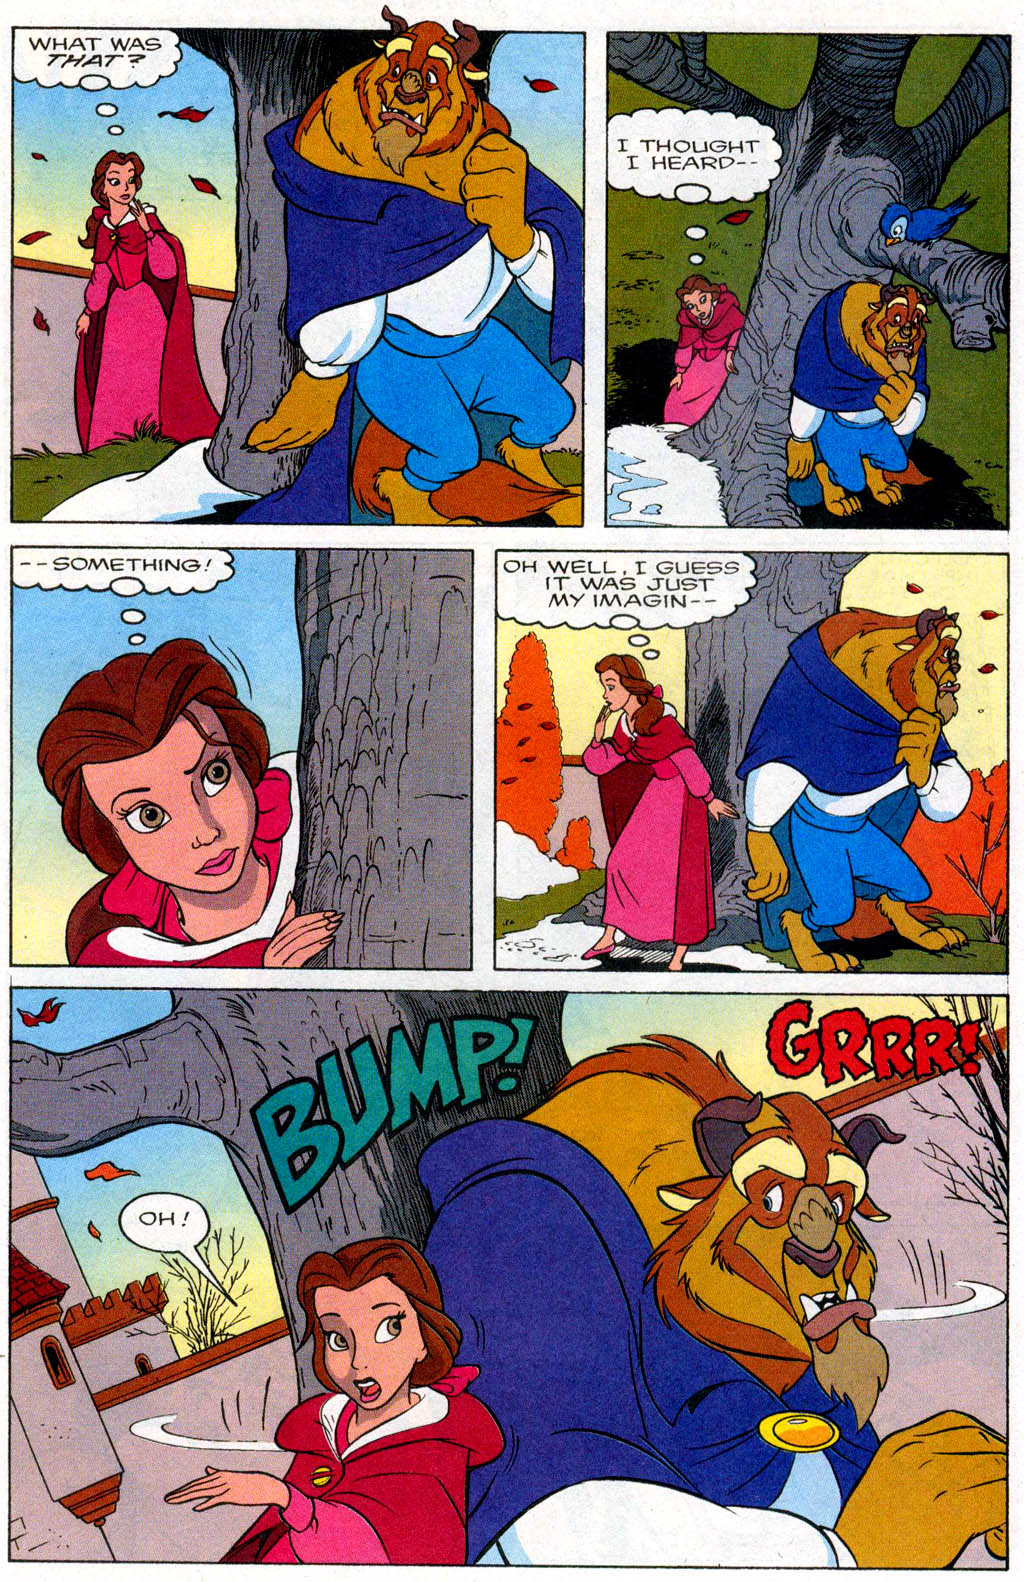 Read online Disney's Beauty and the Beast comic -  Issue #3 - 12